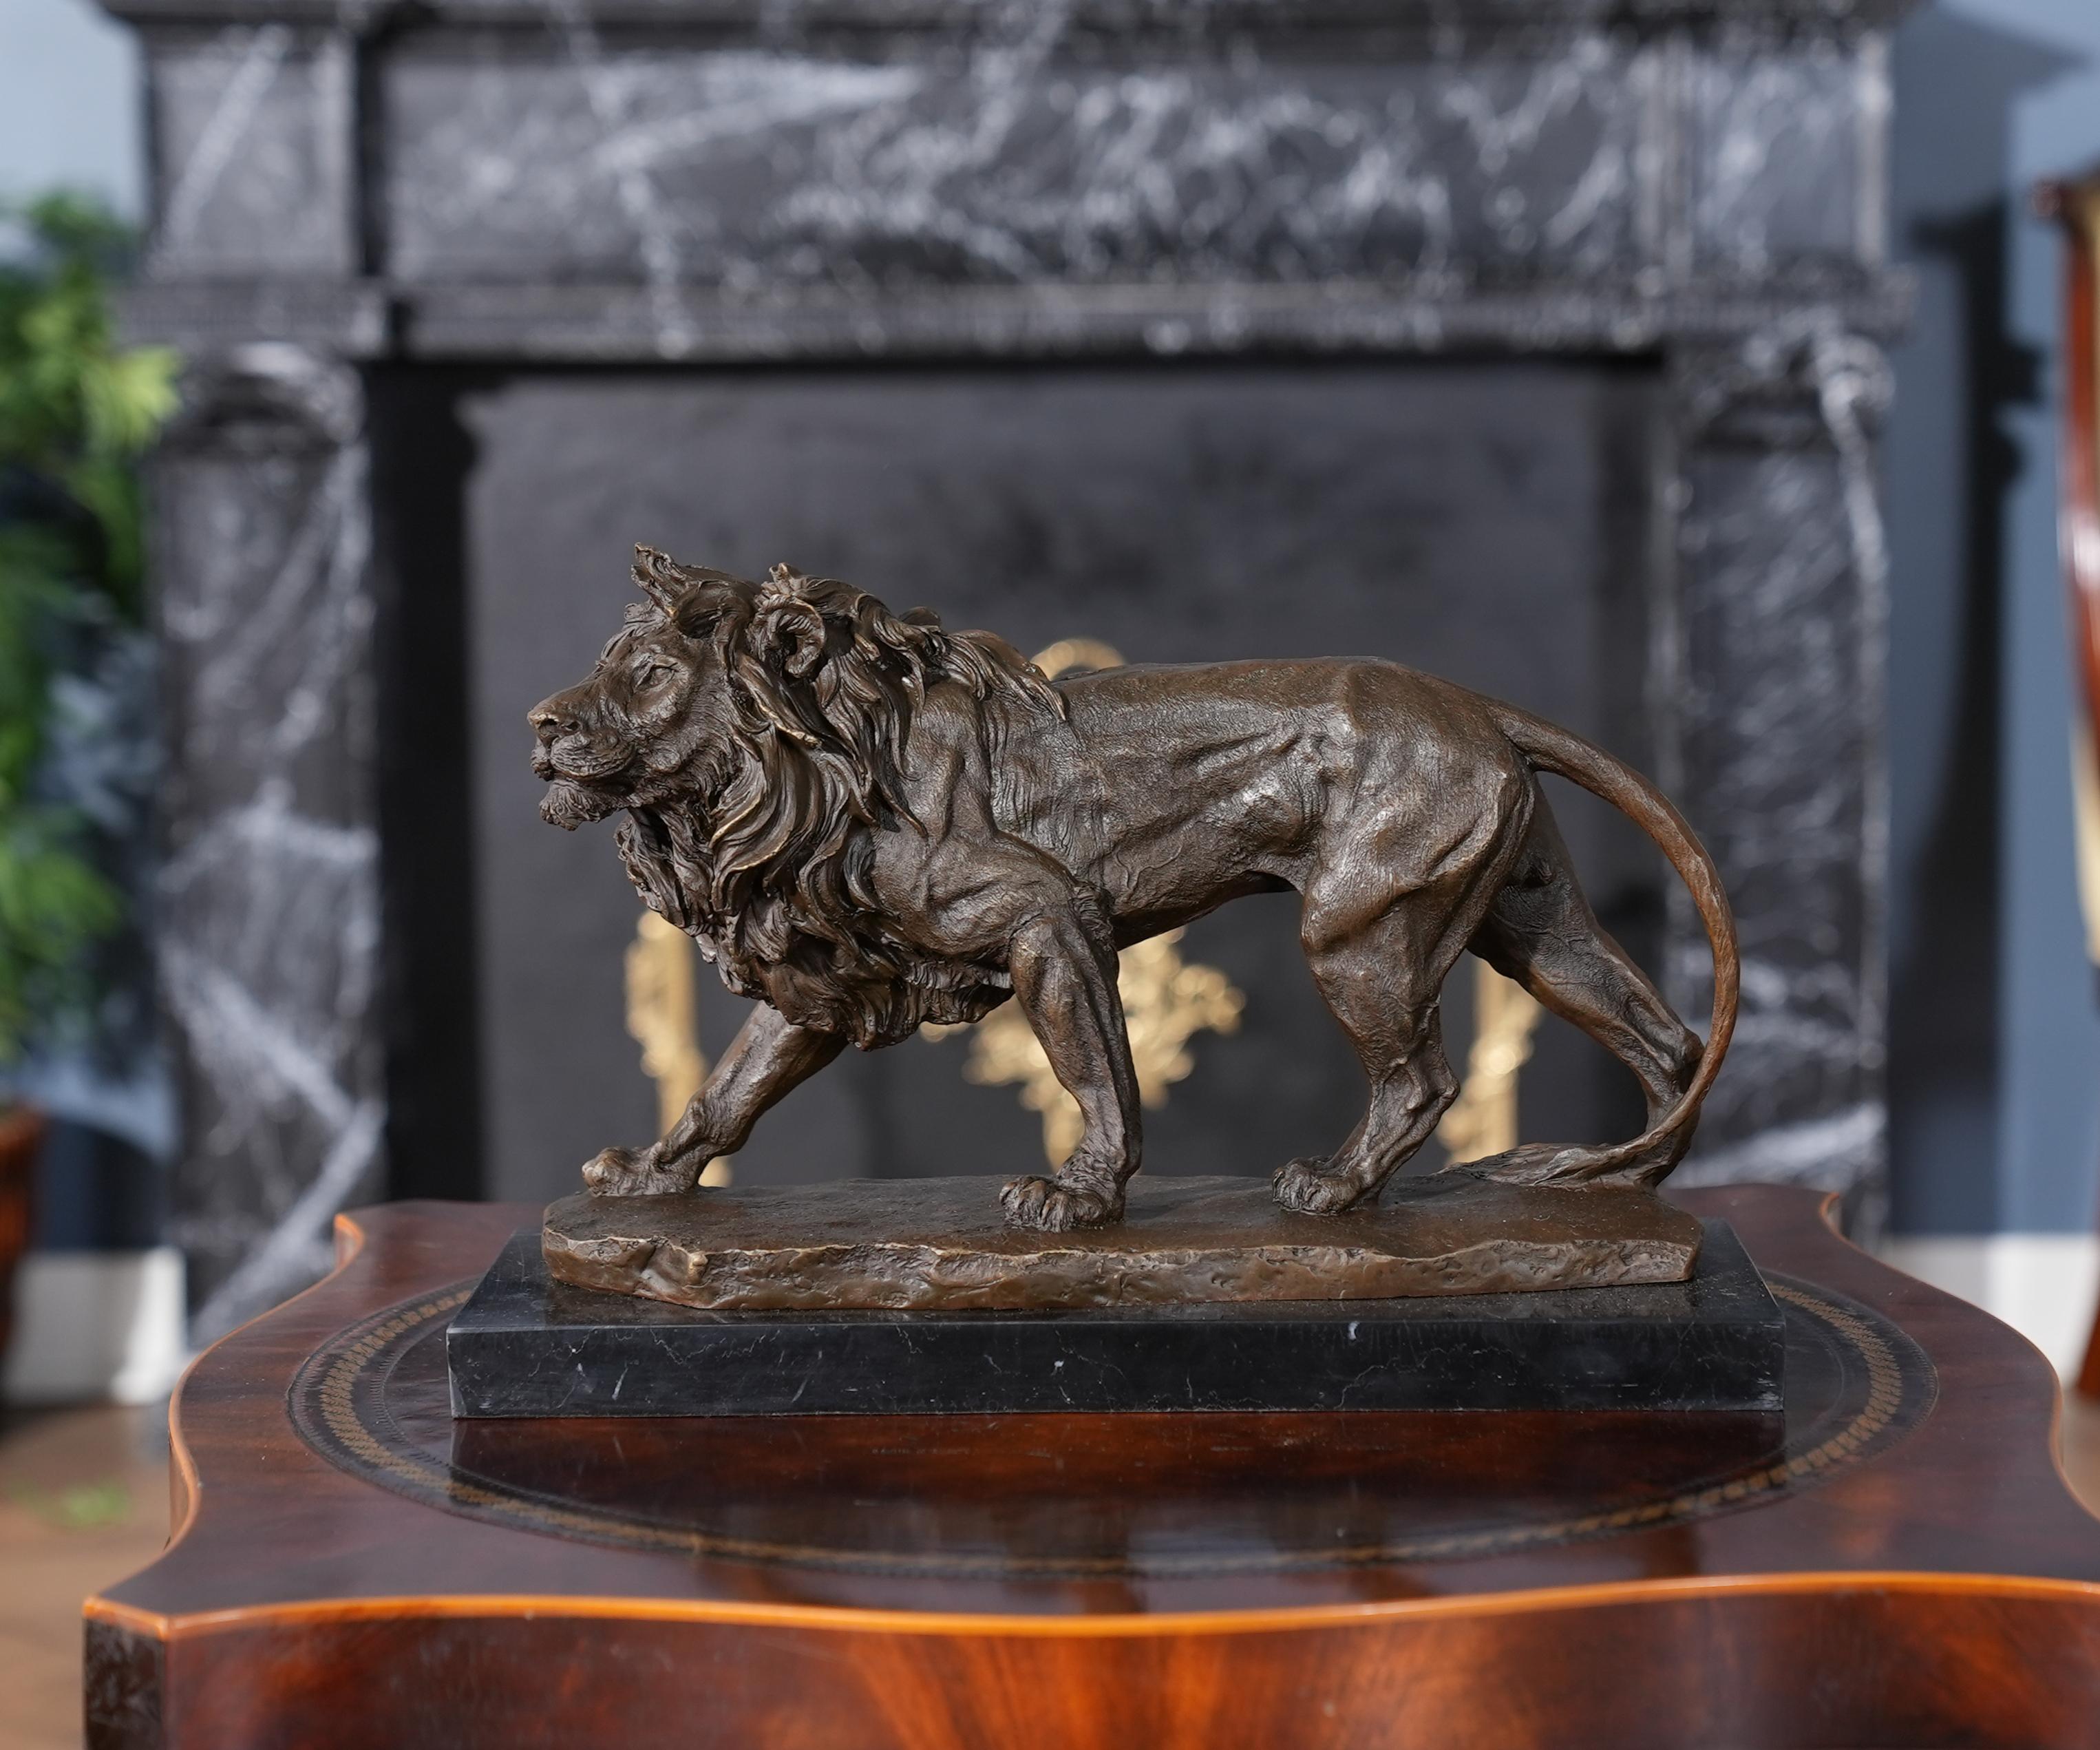 Graceful even when standing still the Bronze Lion with Marble Base is a striking addition to any setting. Using traditional lost wax casting methods the Bull Lion statue is created in pieces and then joined together with brazing and hand chaised